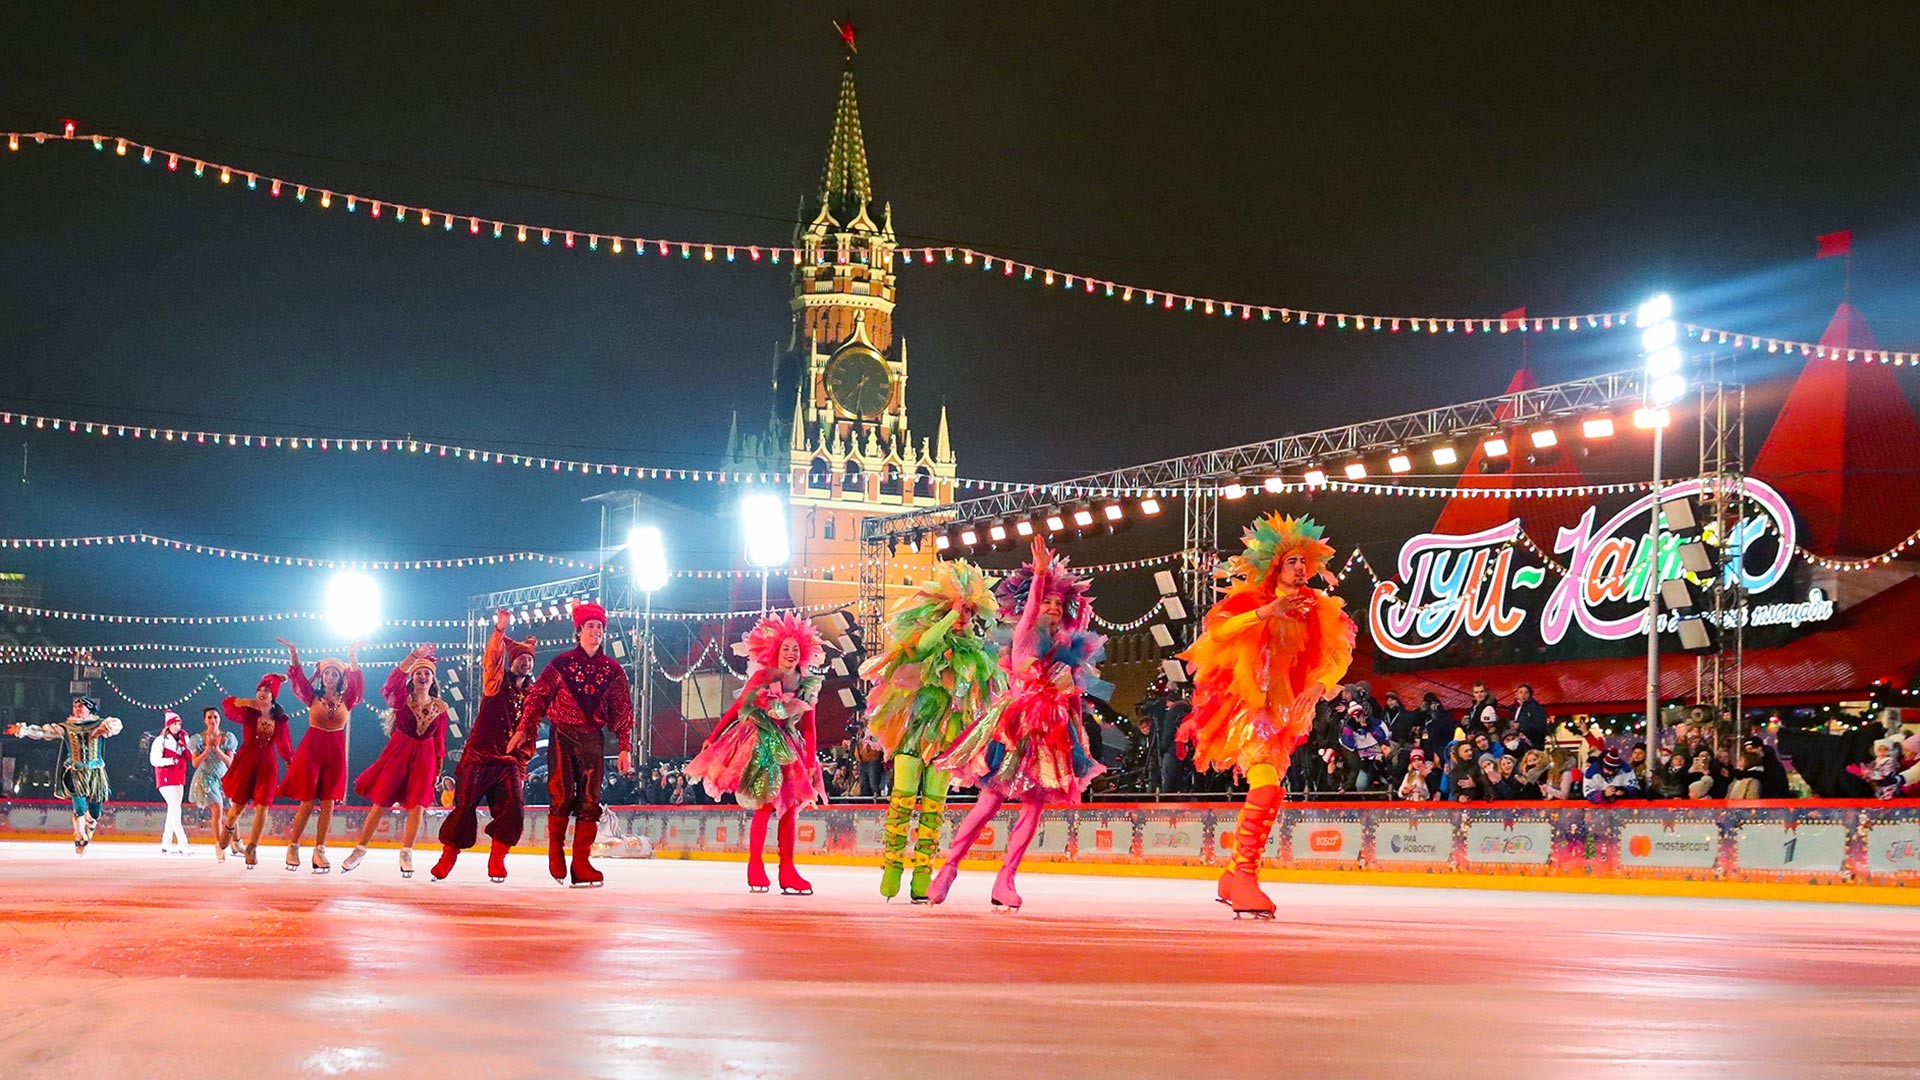 GUM-ice rink on the Red Square.